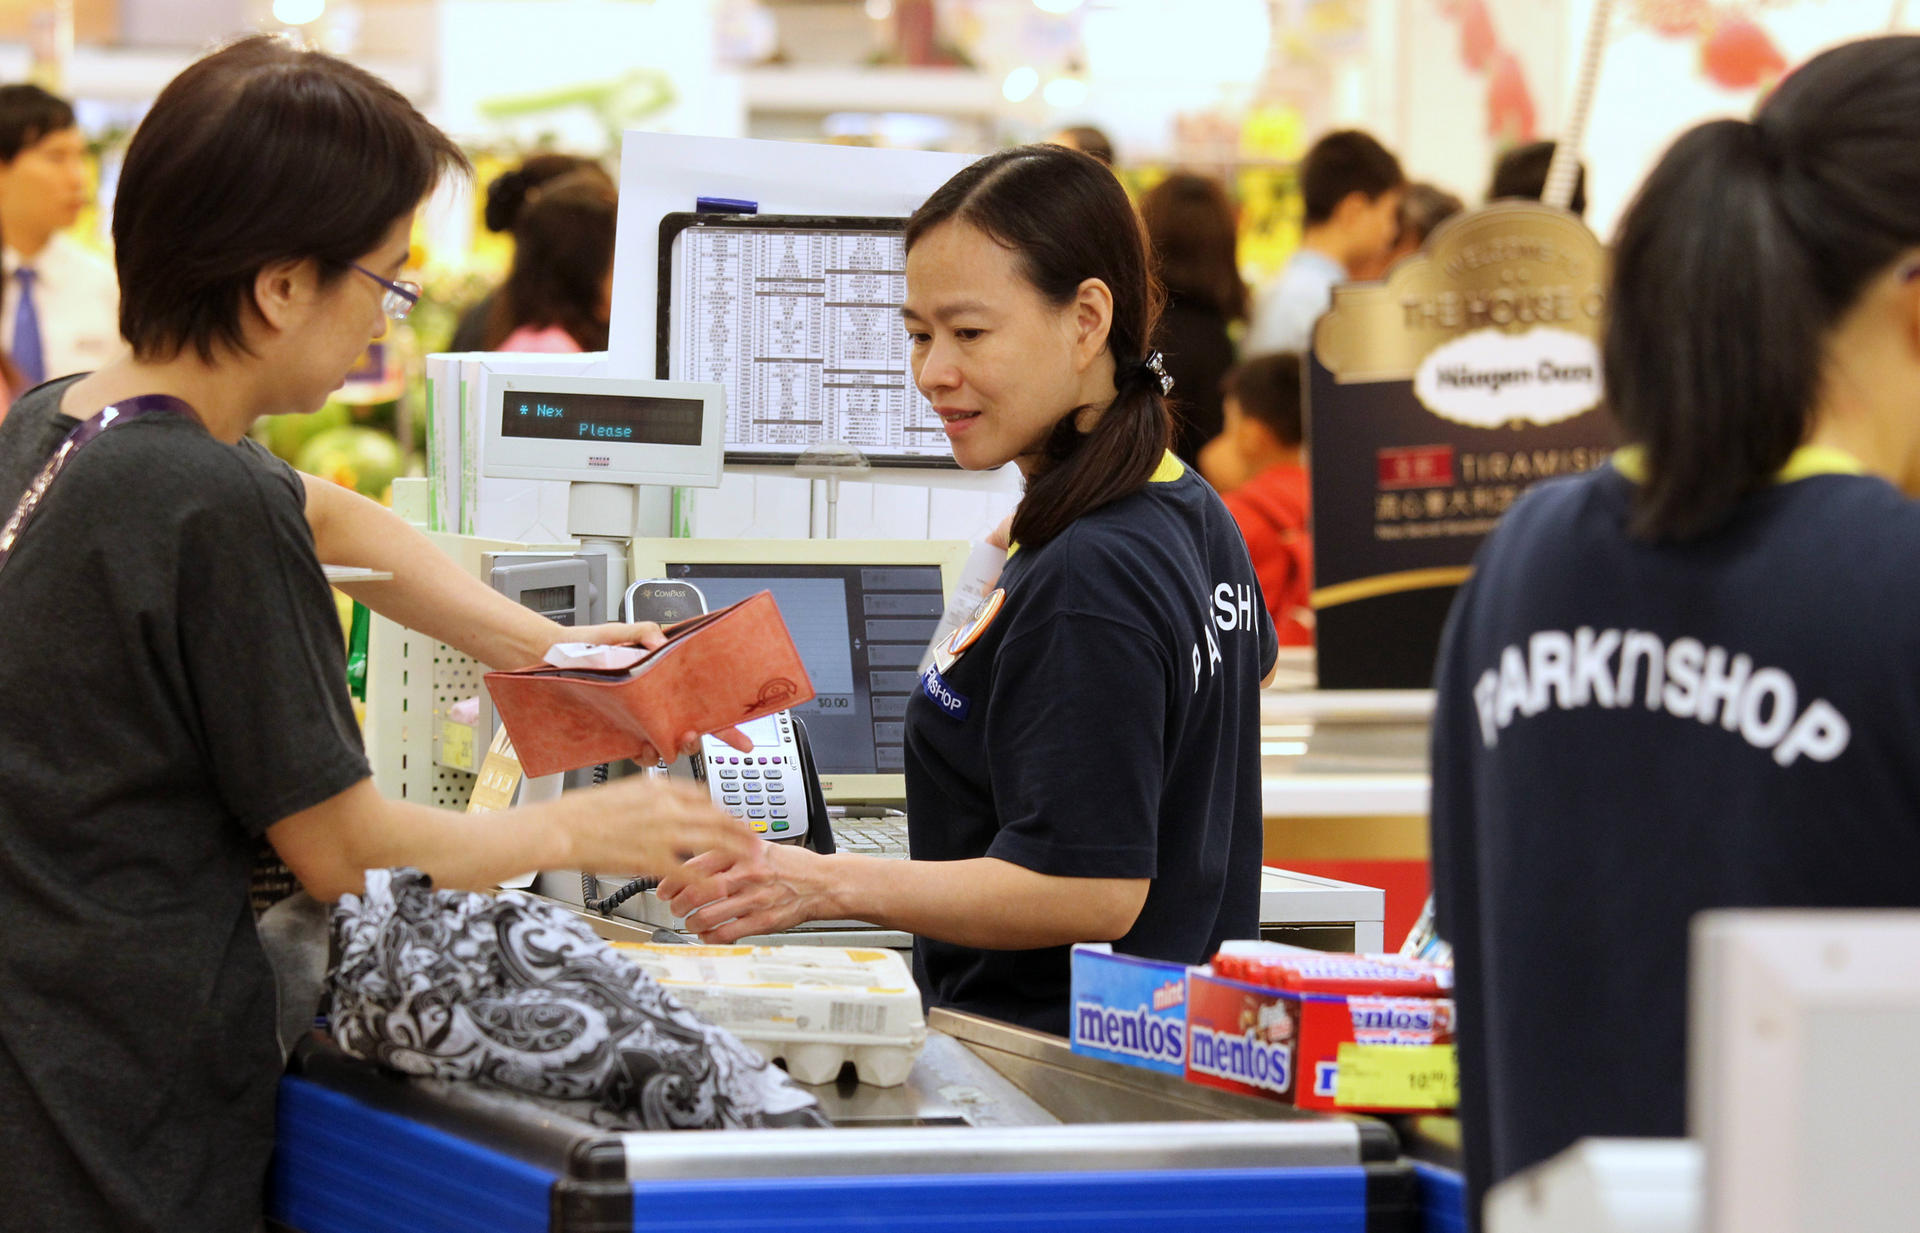 PARKnSHOP Give-Back to Hong Kong Citizens 320,000 Winners to Share $32  Million through Lucky Draw Also A Chance to Win 1-Minute Shopping Spree